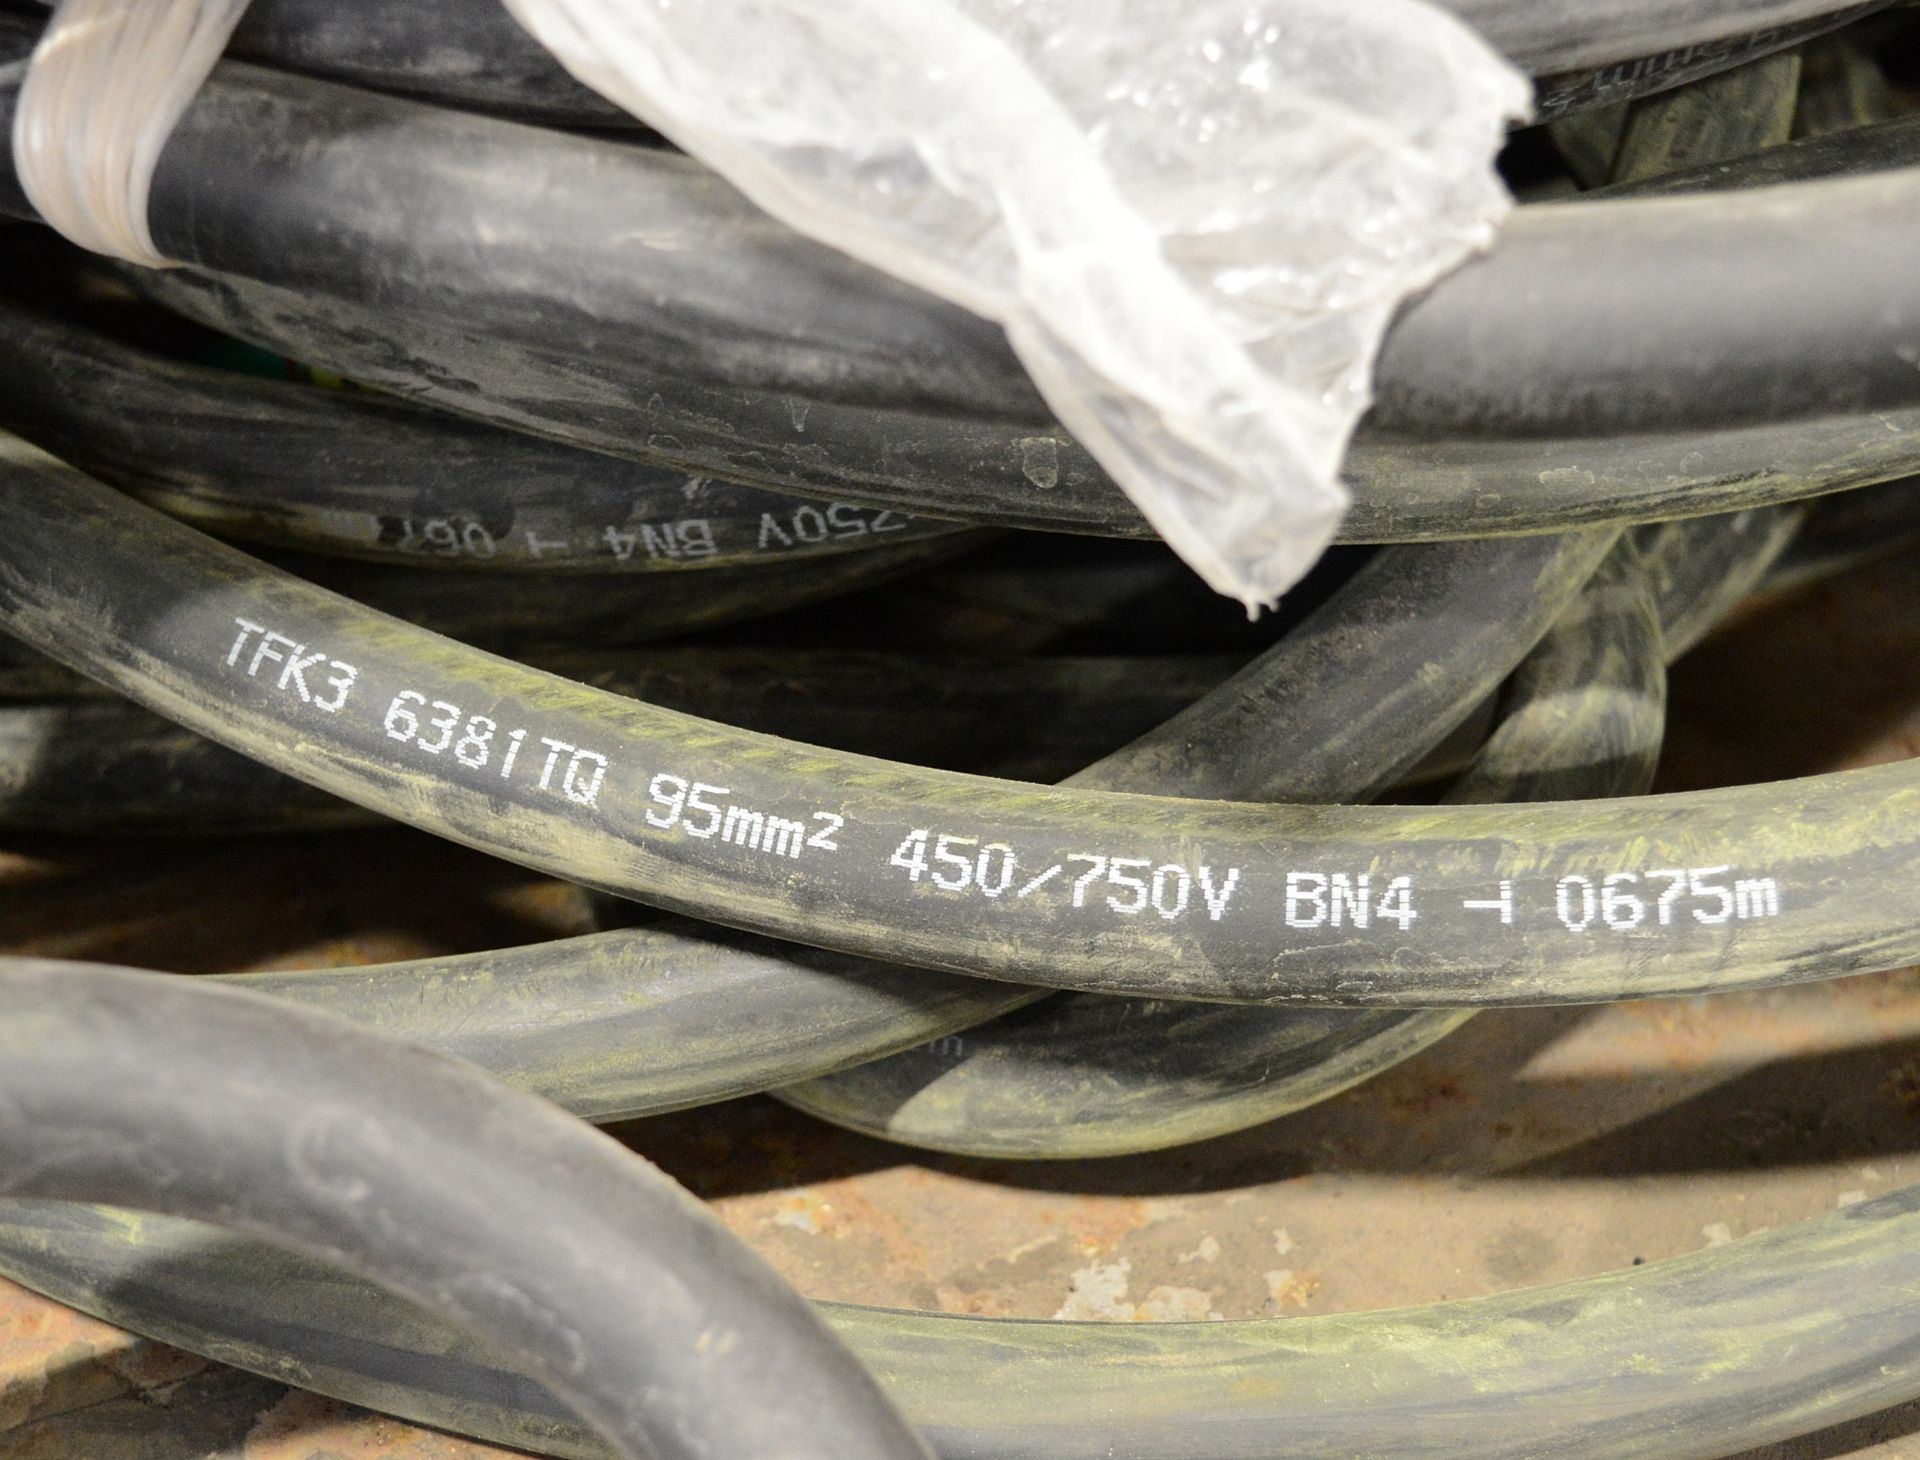 22x Various Lengths Of 95mm2 Electrical Cable - Image 3 of 3